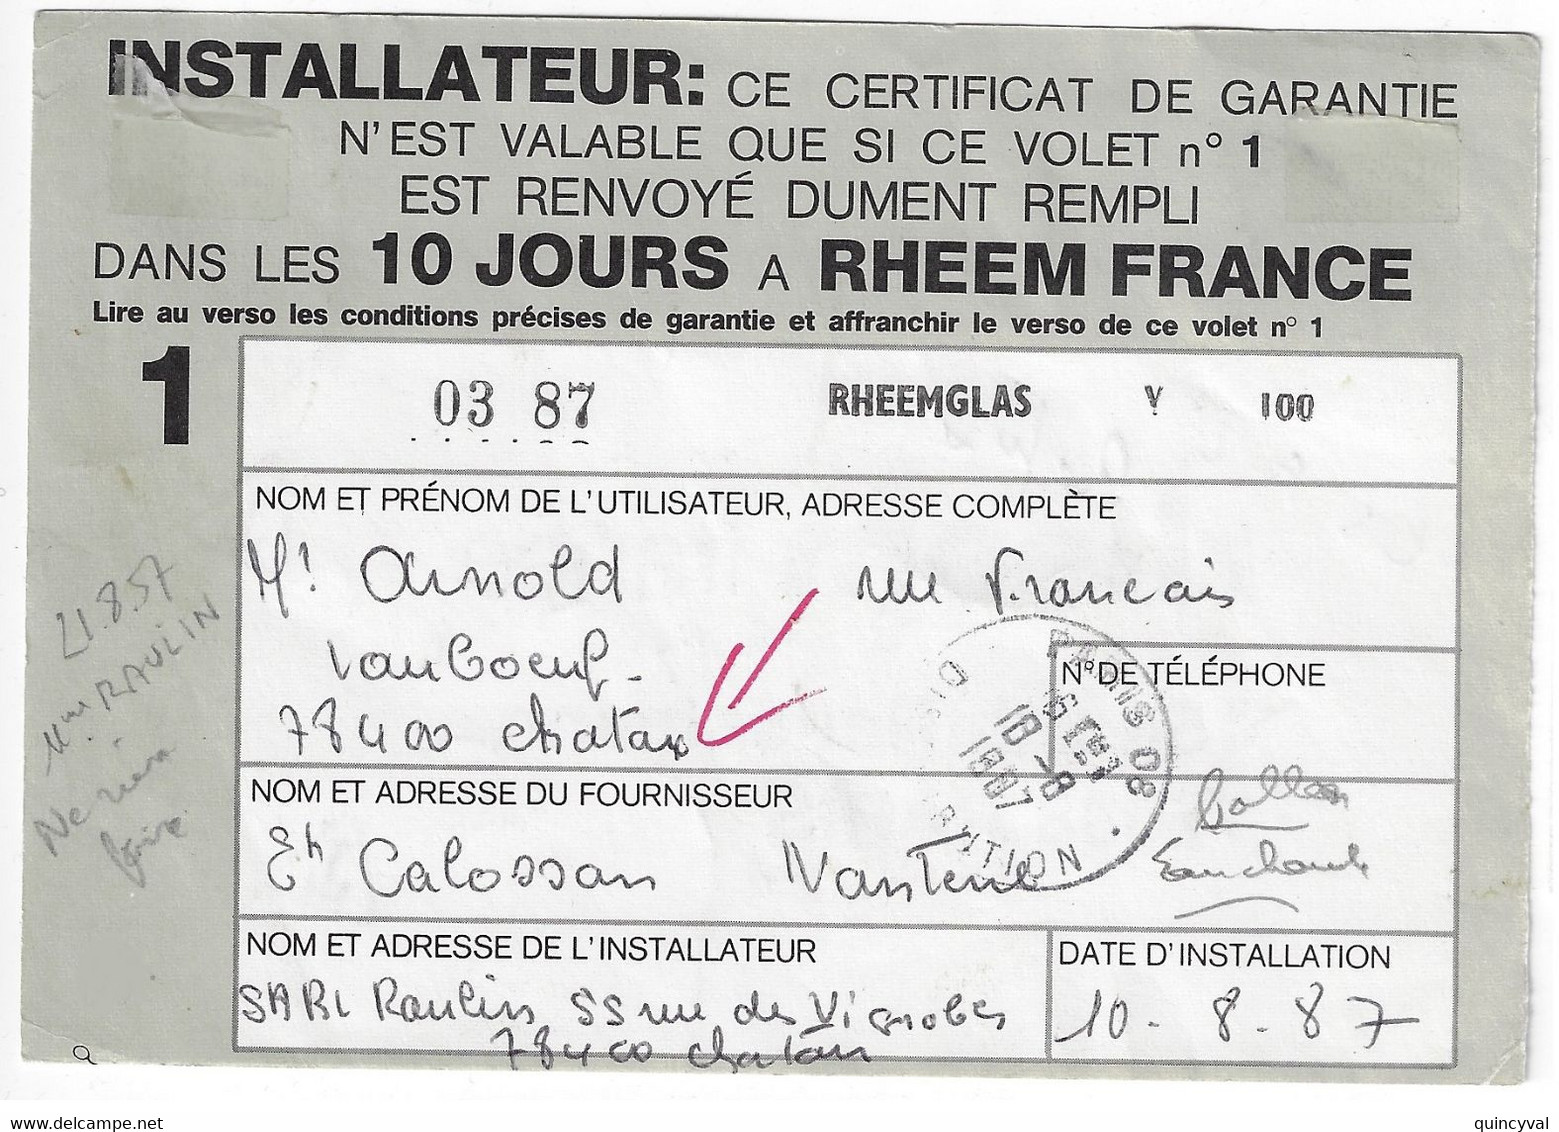 CHATOU 78 Carte Postale Commerciale RHEEM Affranchie Liberté 1,90 F Yv 2424 Ob 1987 TAXE REFUSEE Insectes Yv T 110 111 - 1960-.... Lettres & Documents